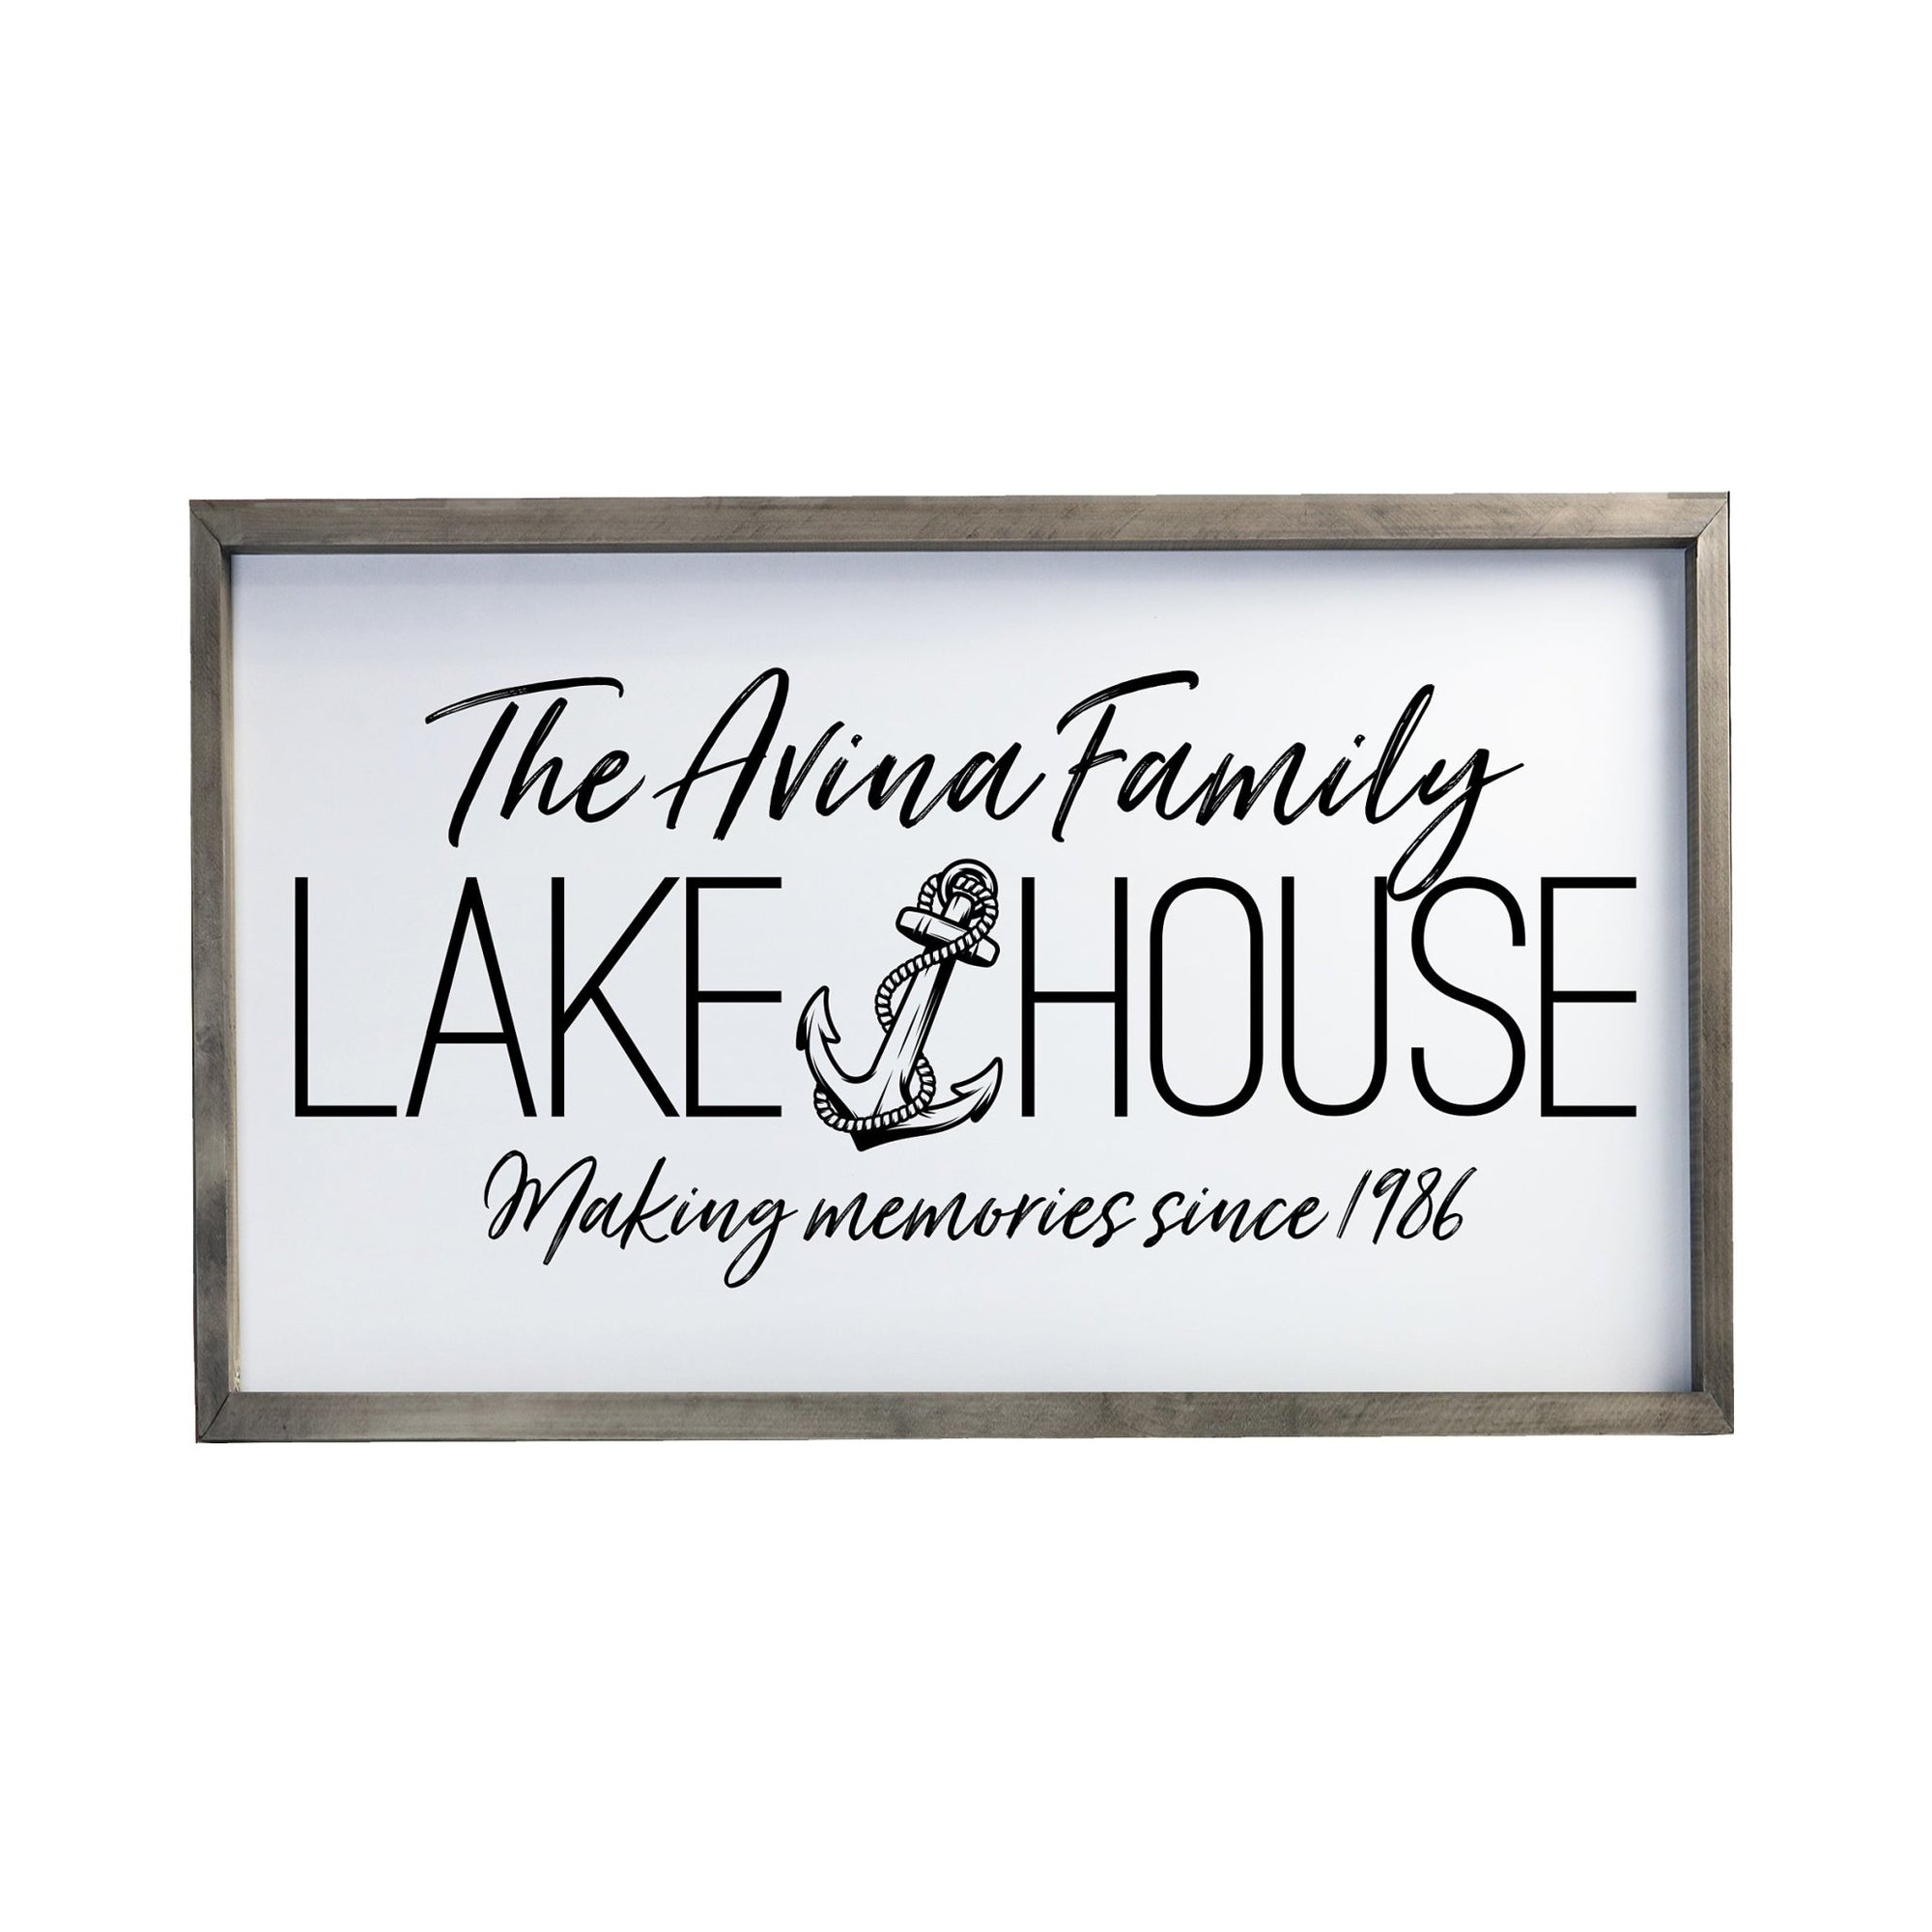 Inspirational Personalized Framed Shadow Box 16x25 - Lake House (Anchor) - LifeSong Milestones